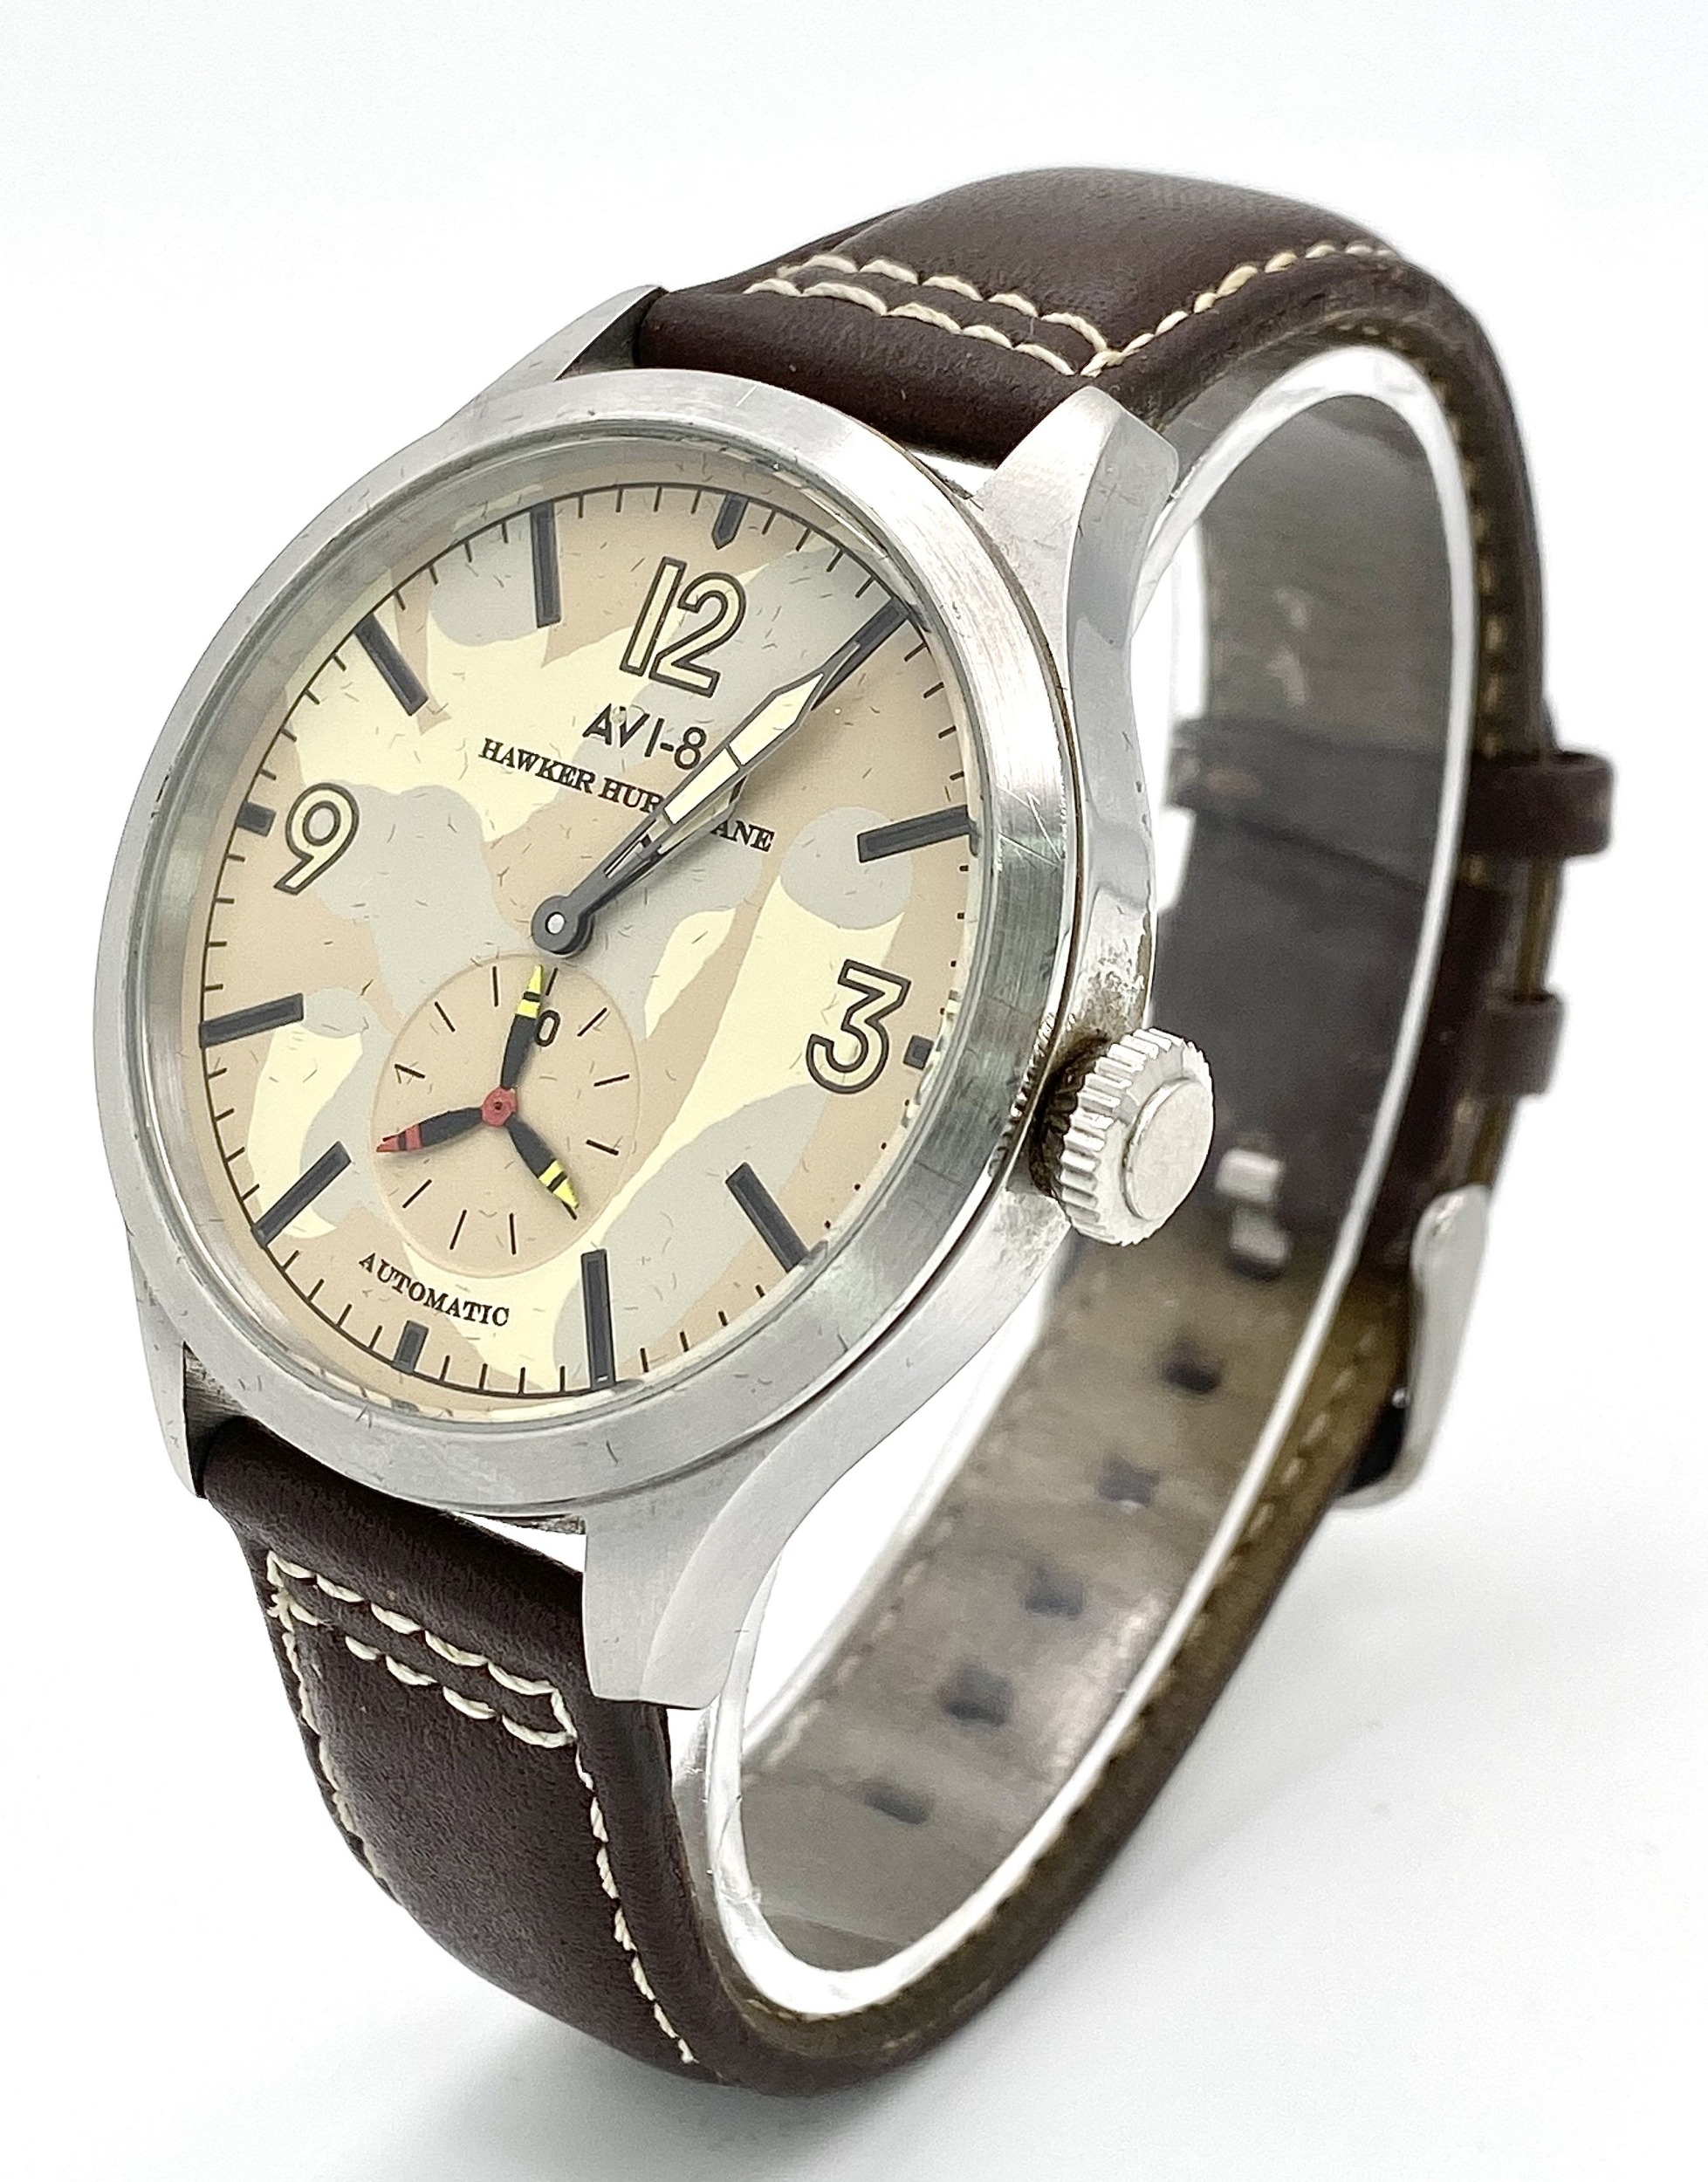 A Men’s ‘Hawker Hurricane’ Automatic Pilots Watch by AVI8. 47mm Including Crown. Full Working Order. - Image 3 of 9